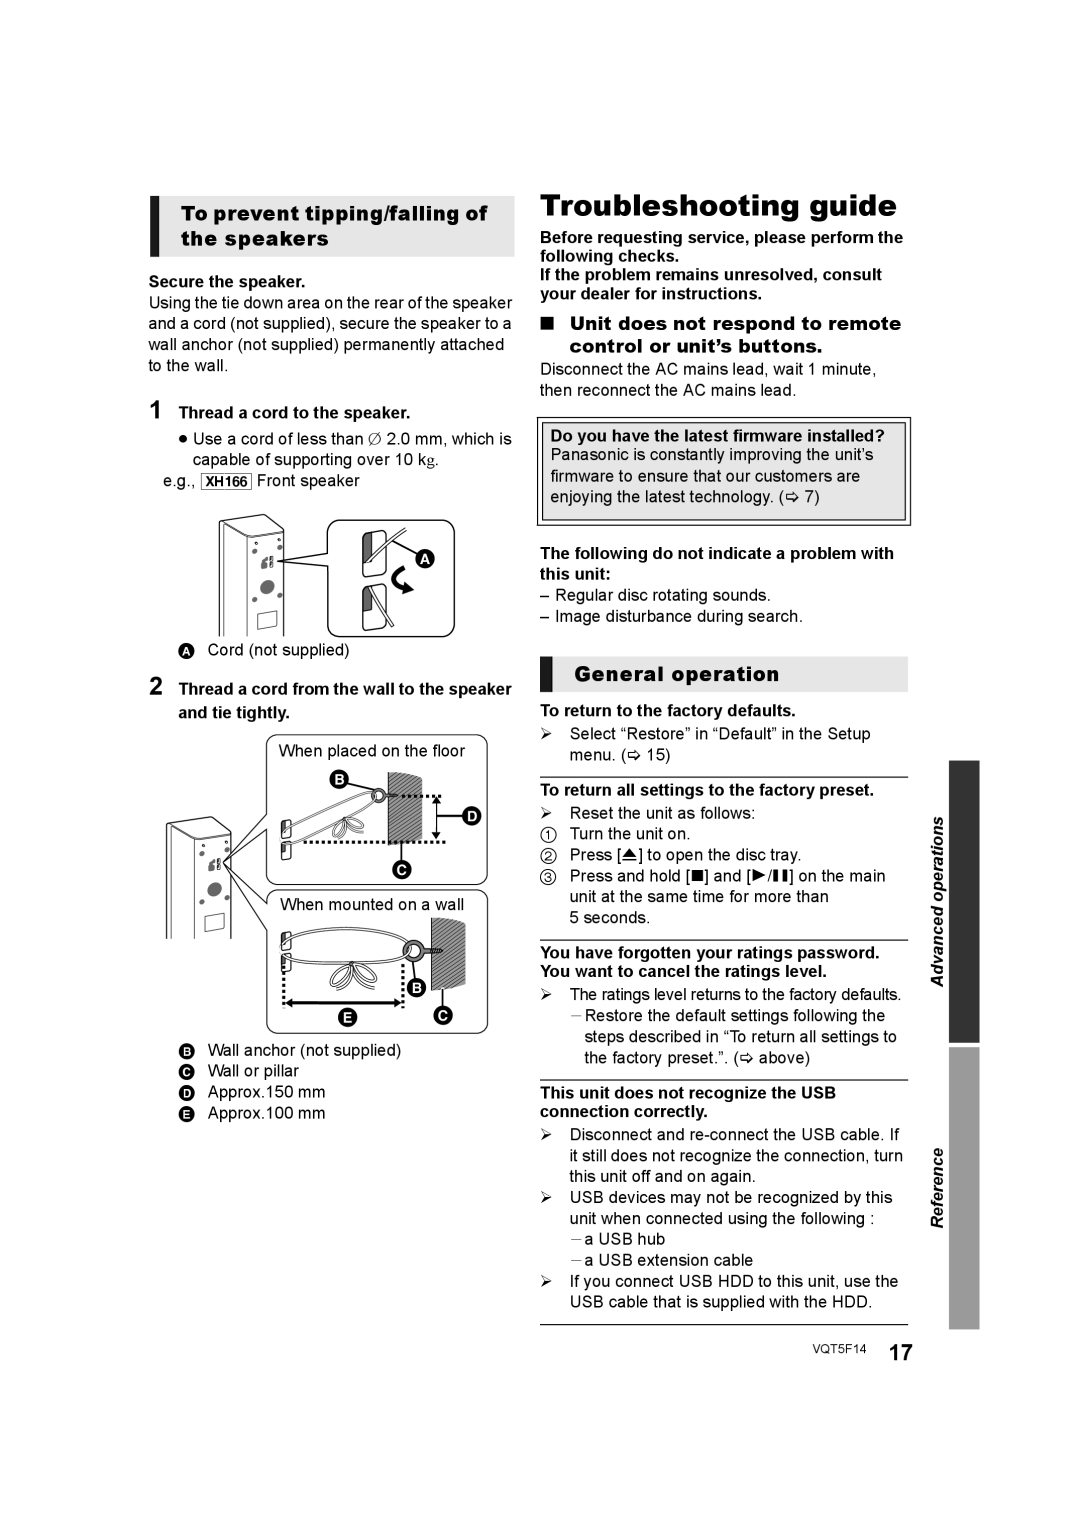 Panasonic SC-XH166 Troubleshooting guide, To prevent tipping/falling of the speakers,   ,   , General operation 